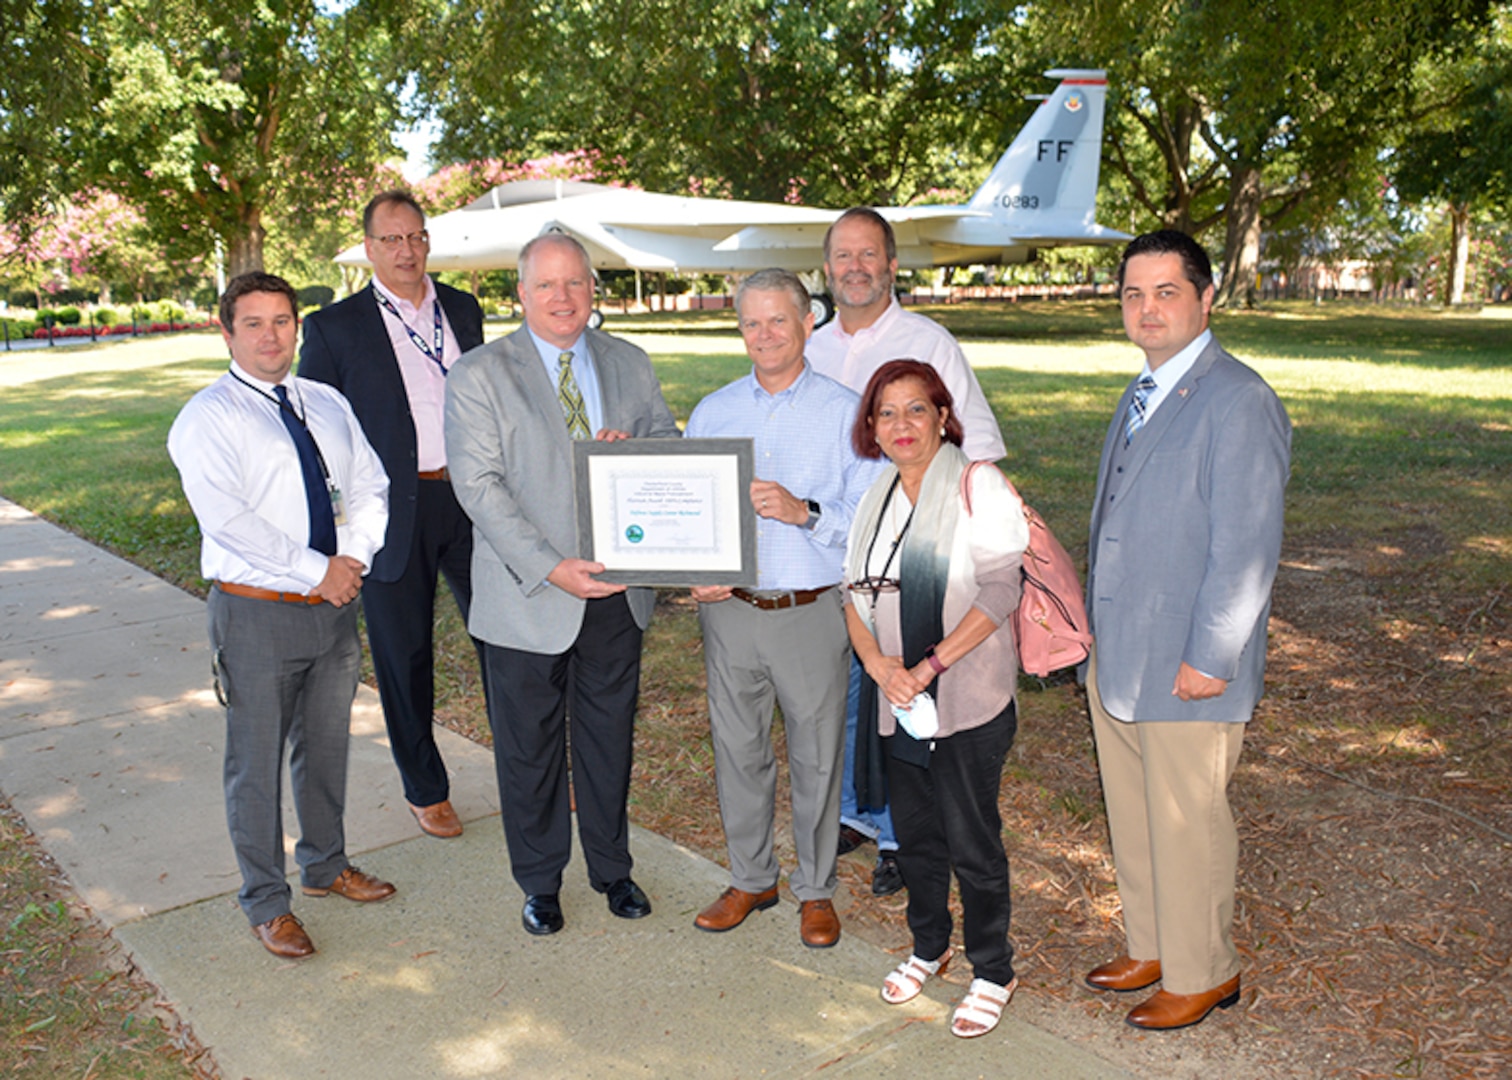 Chesterfield County toasts DLA Installation Management Richmond’s wastewater treatment efforts at DSCR with Platinum Award